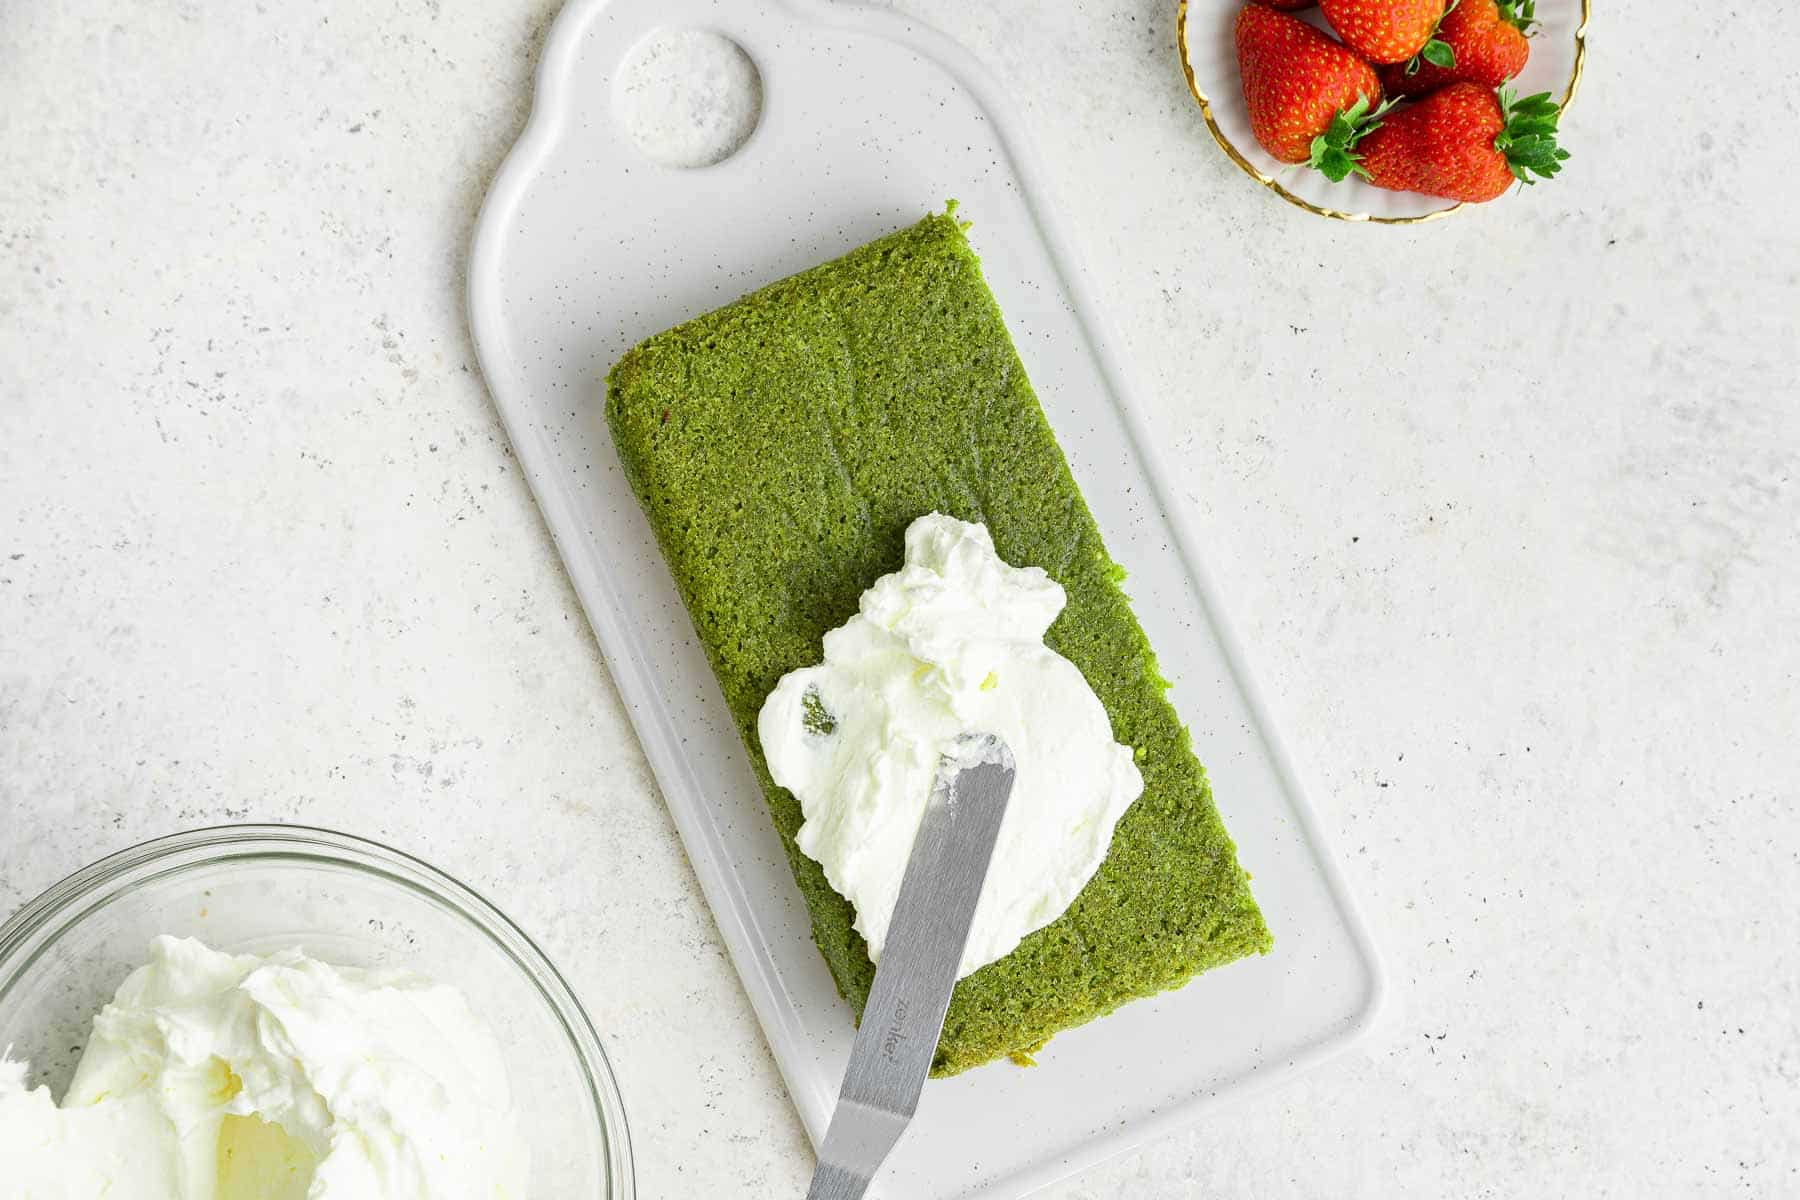 Rectangular green cake being spread with white frosting.